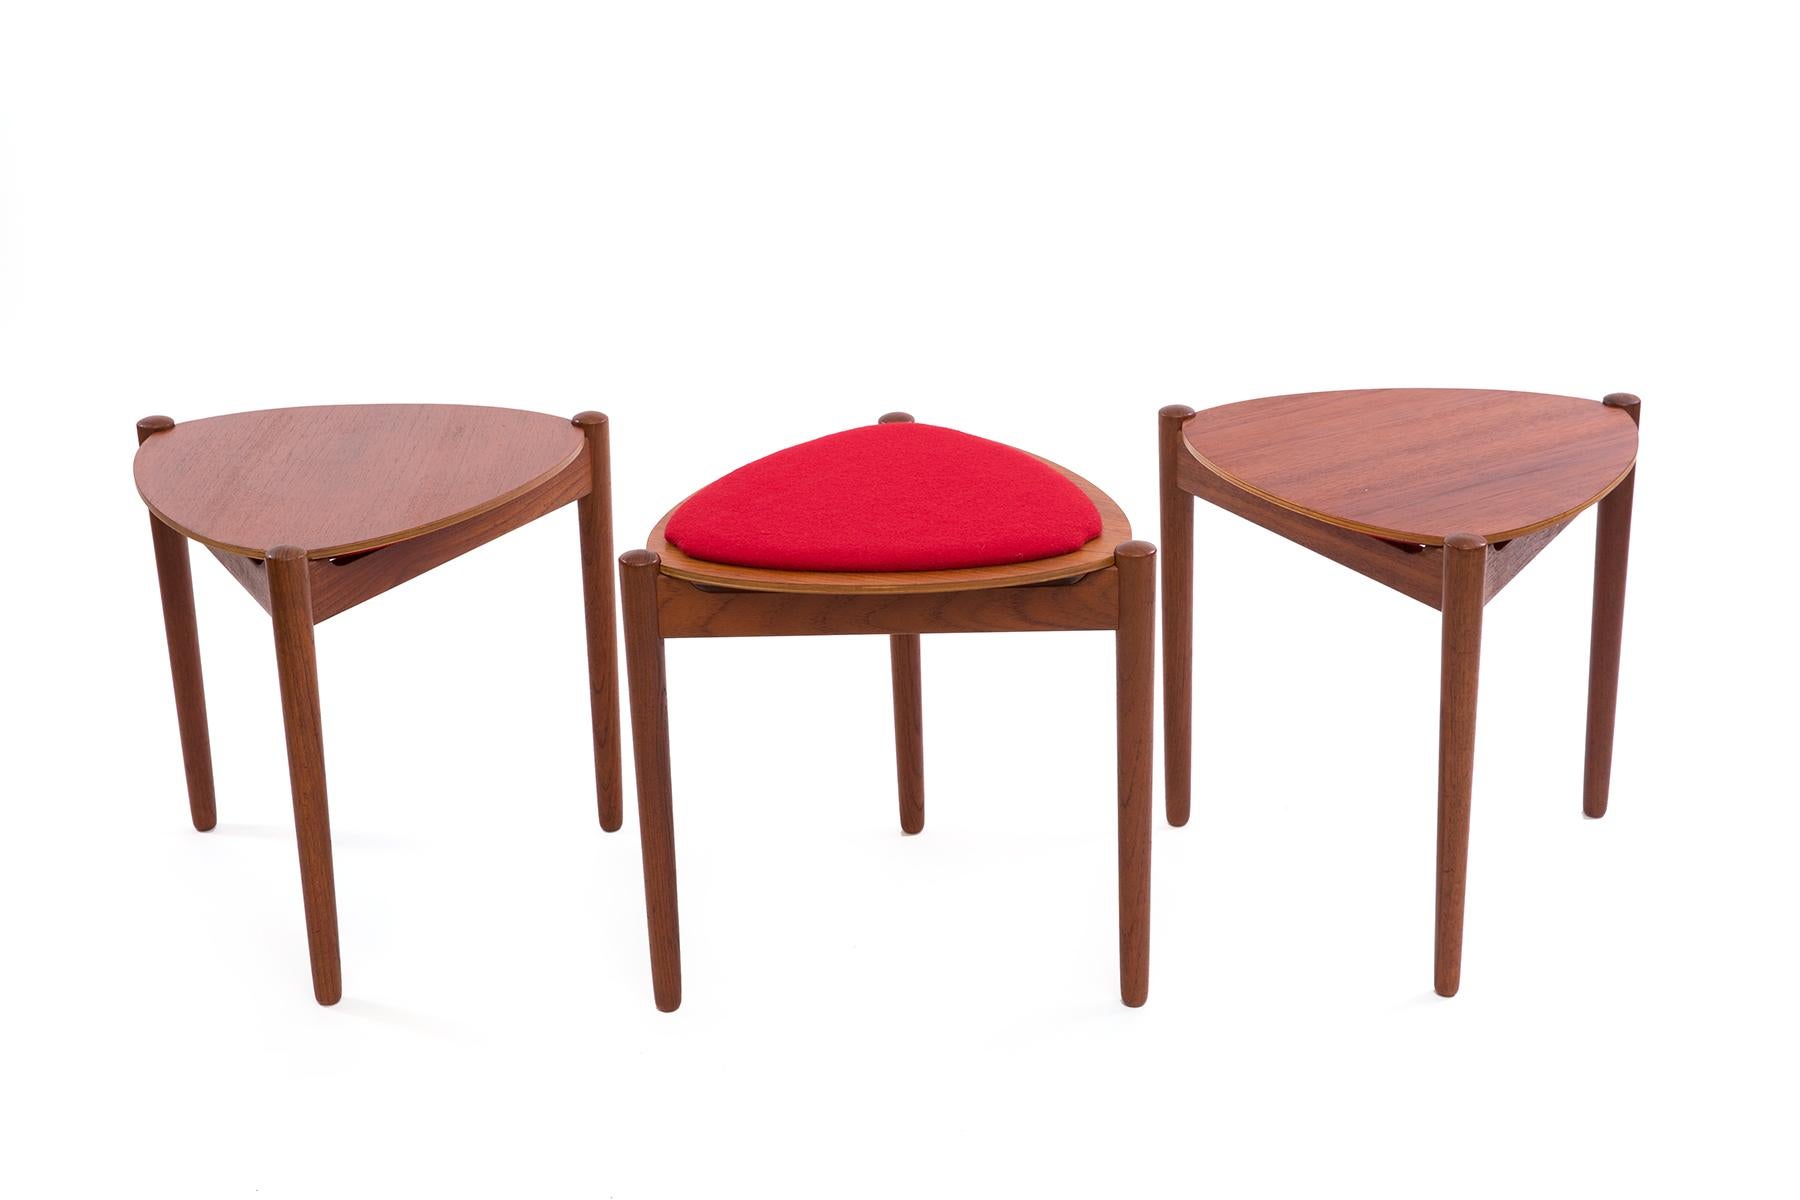 A set of 3 handsome Danish teak side tables by Hans Olsen for Bramin featuring unique reversible table-tops. Choose the teak side or the bright red woolen side for a pop of color in your home. The set still retains their original Bramin labels.